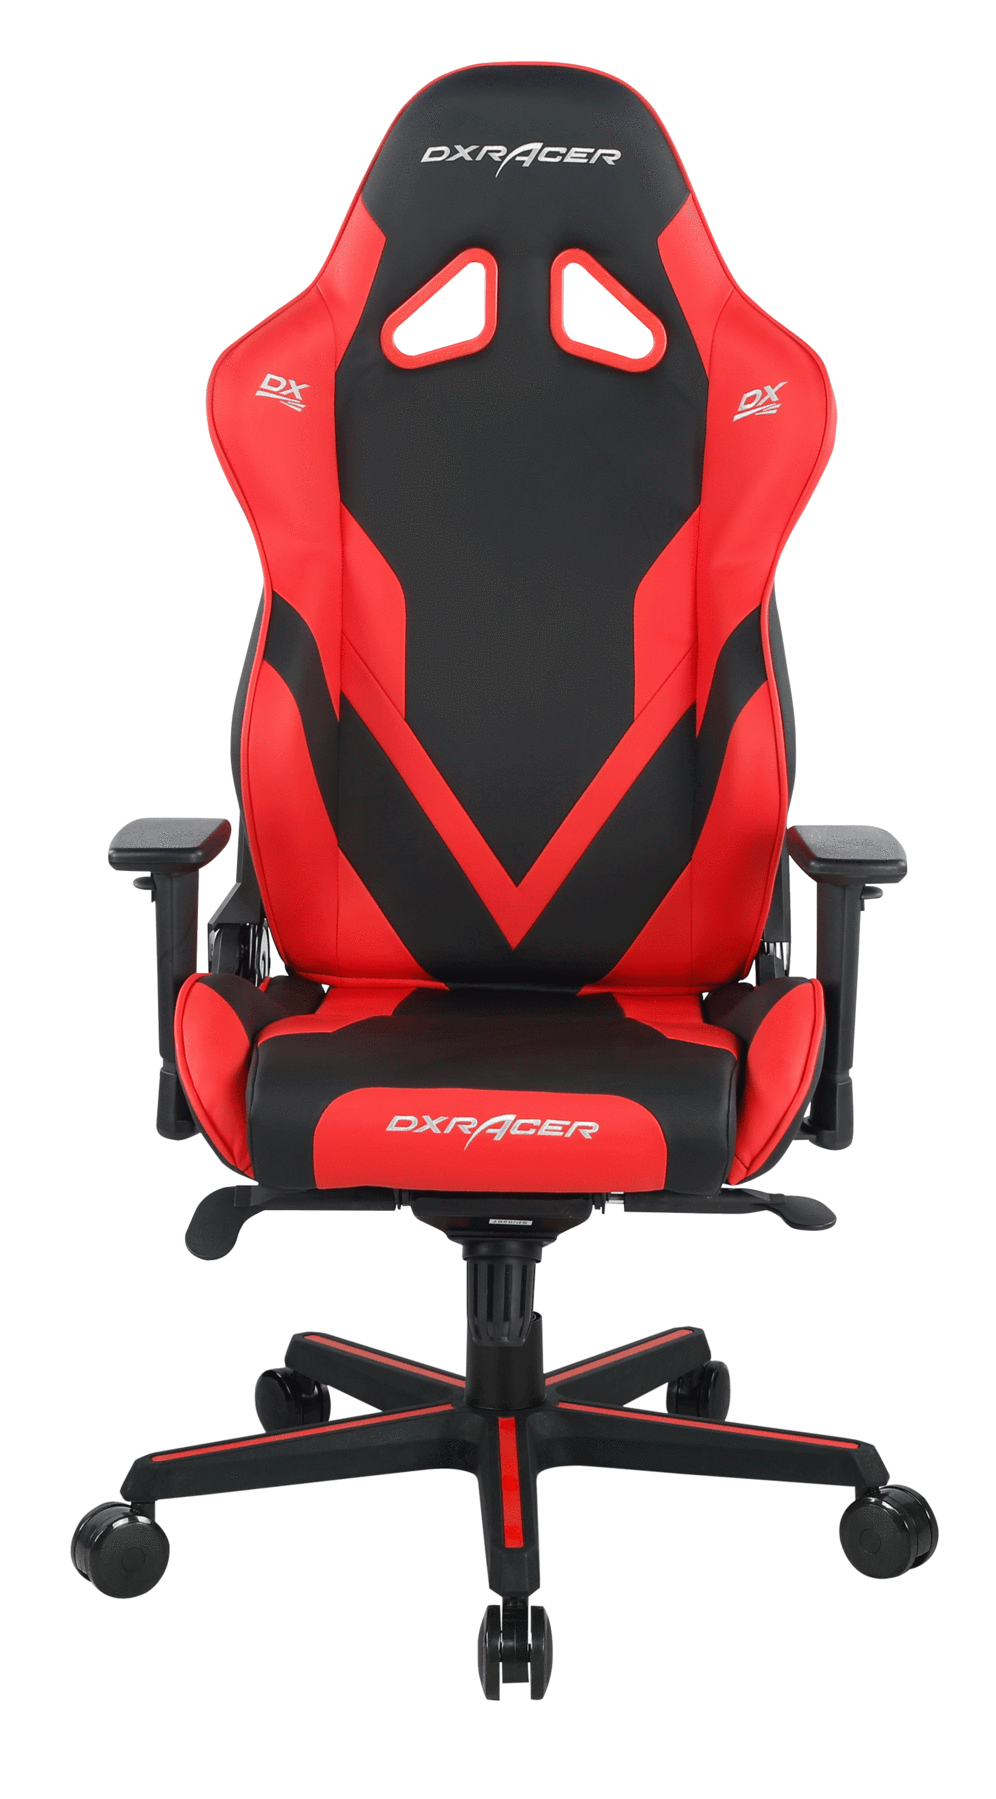 ergonomic Best Gaming Chairs 2021 Amazon for Small Bedroom